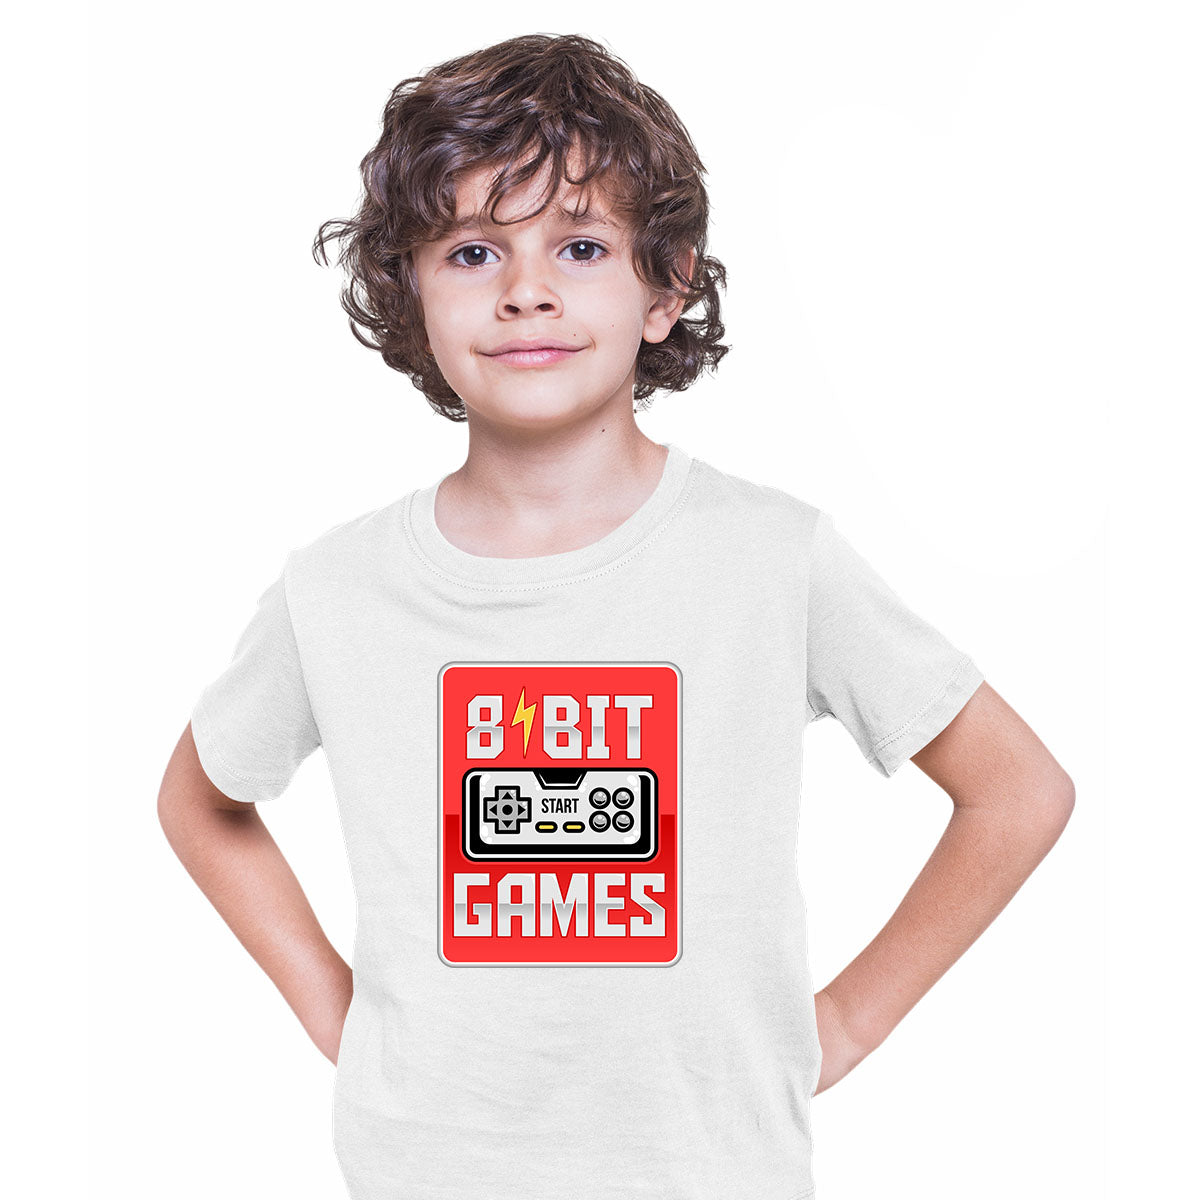 Retro Game 80's Collection Seven 8 Bit games Typography T-shirt for Kids - Kuzi Tees